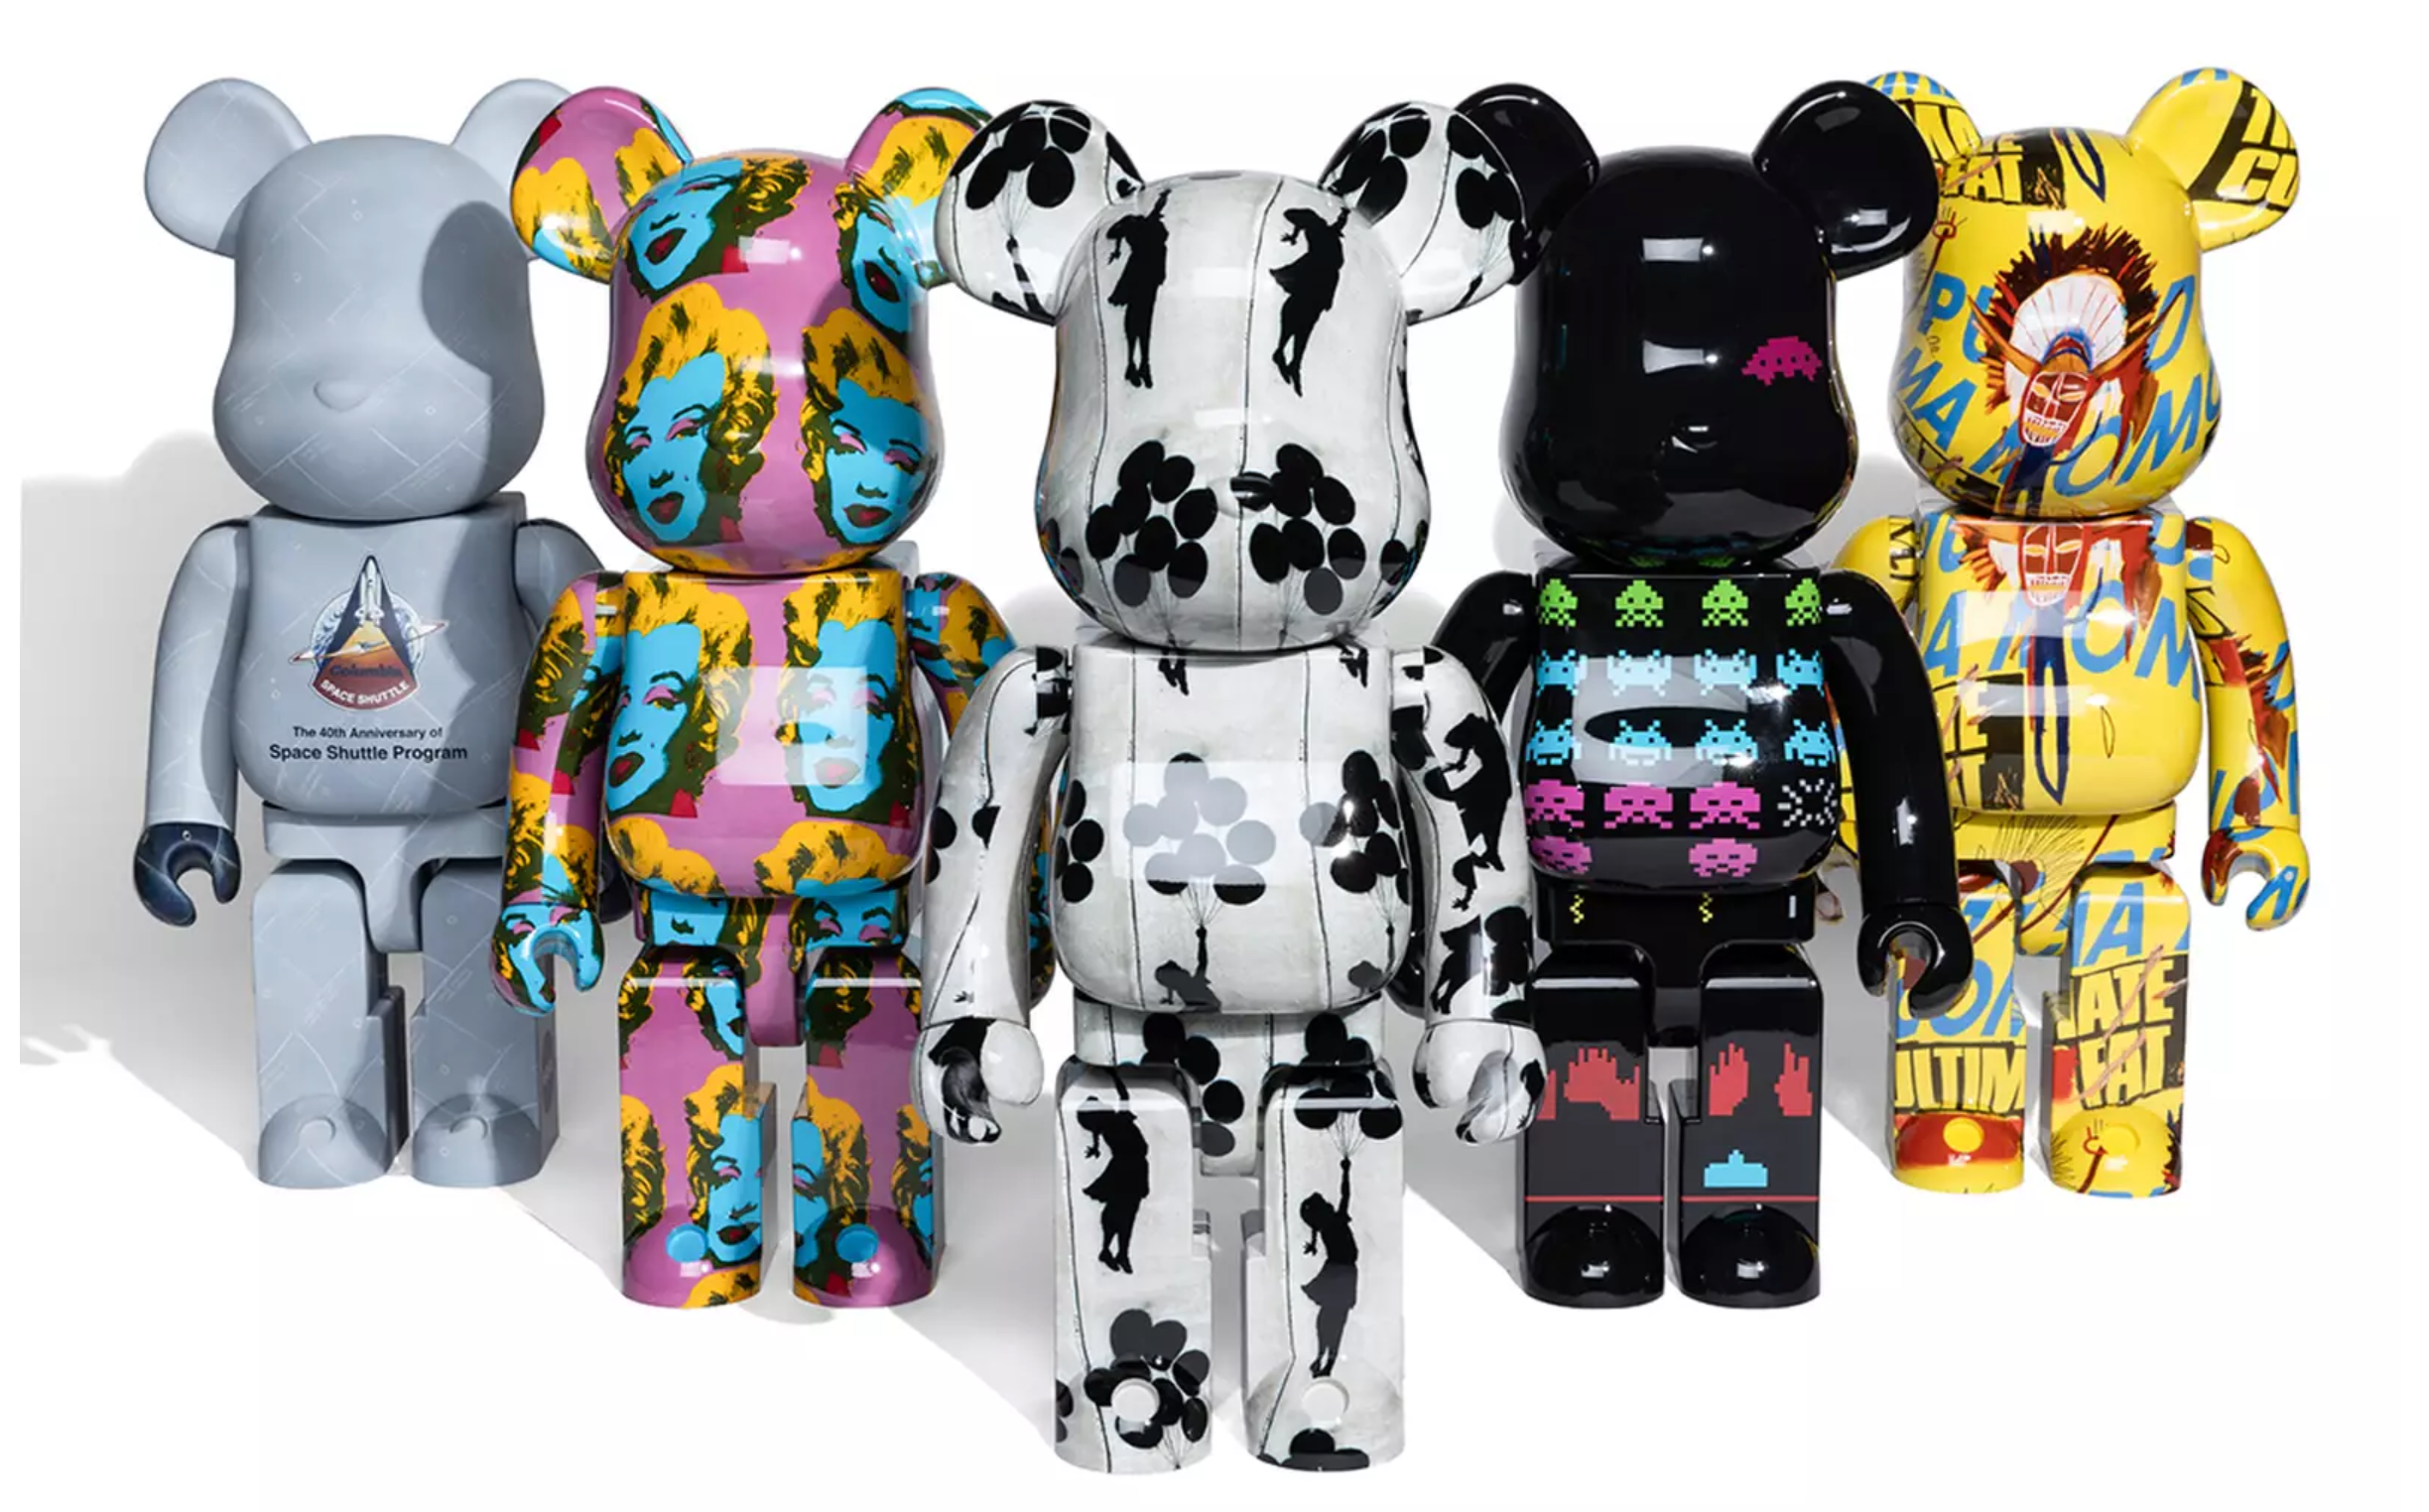 So, it Turns Out That BE@RBRICK Might Be a Good Investment